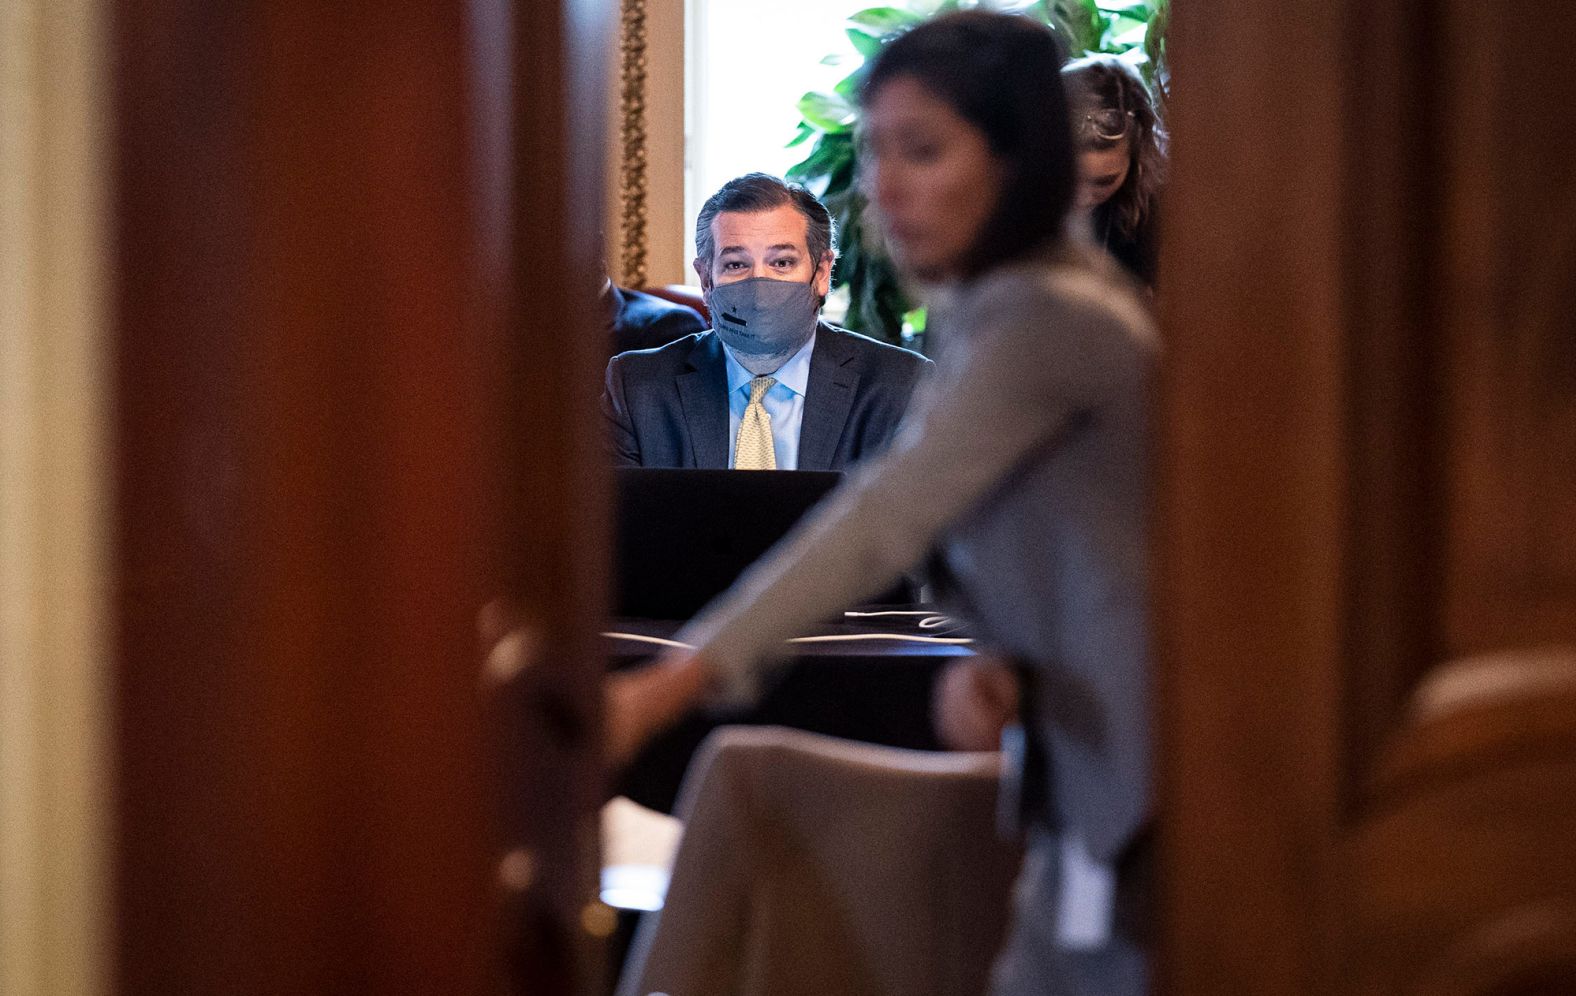 US Sen. Ted Cruz sits in front of a computer as he meets with Donald Trump's lawyers during a break in the trial on Friday. Cruz was part of a group of Republican senators <a href="index.php?page=&url=https%3A%2F%2Fwww.cnn.com%2Fpolitics%2Flive-news%2Ftrump-impeachment-trial-02-12-2021%2Fh_f4d65af9a101e1eca296adb937436e76" target="_blank">who had been actively counseling the Trump legal team.</a>